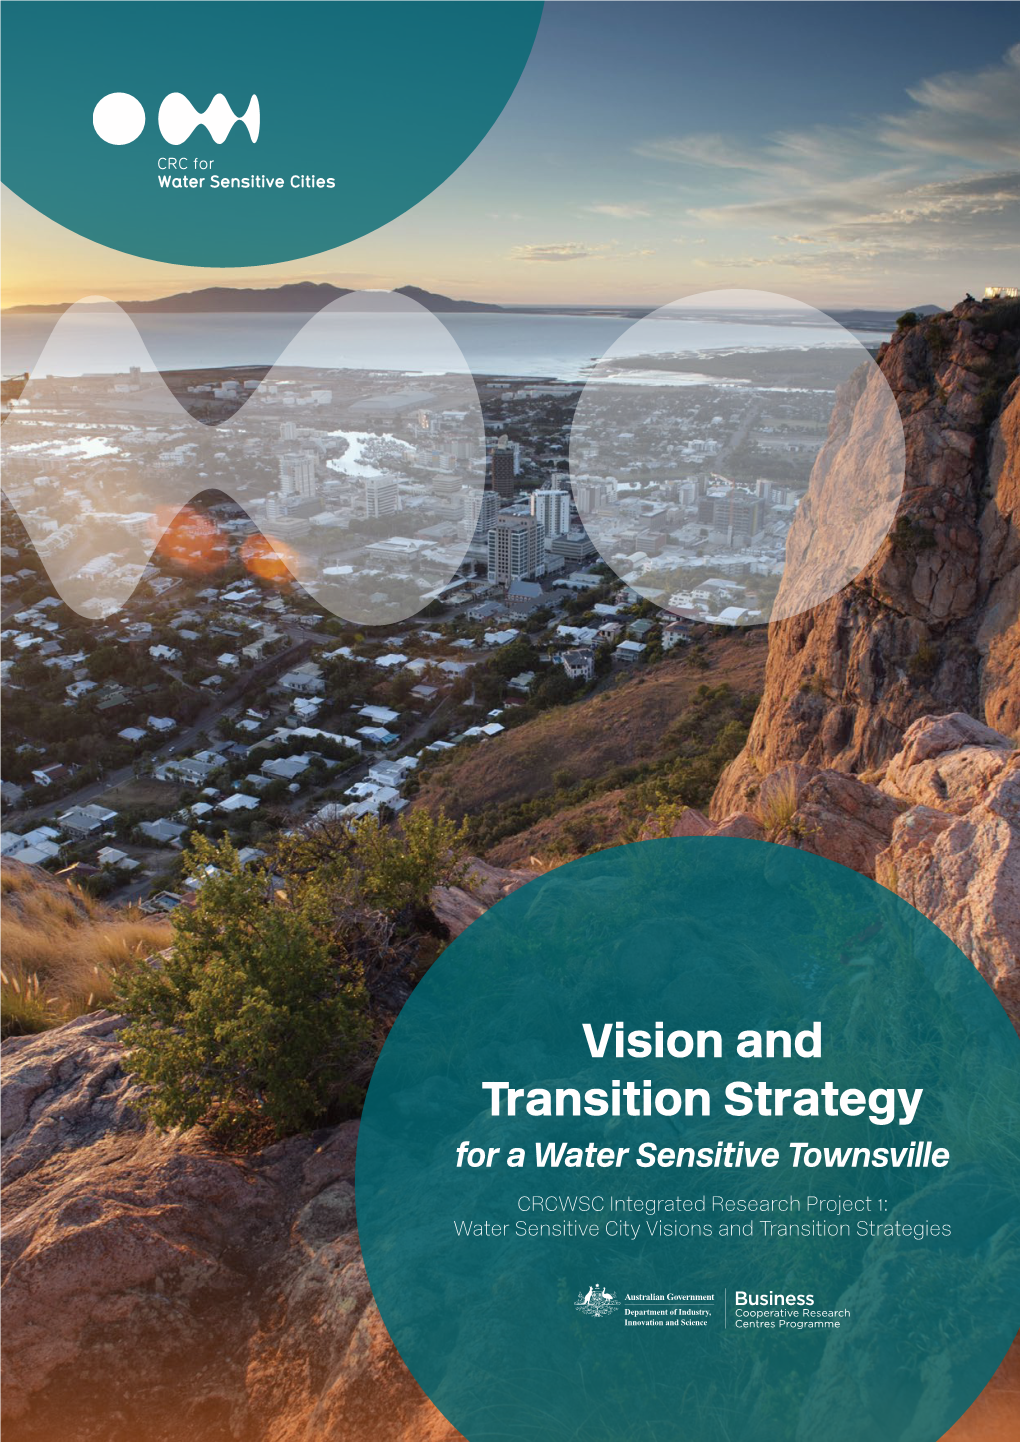 Vision and Transition Strategy for a Water Sensitive Townsville (IRP1)